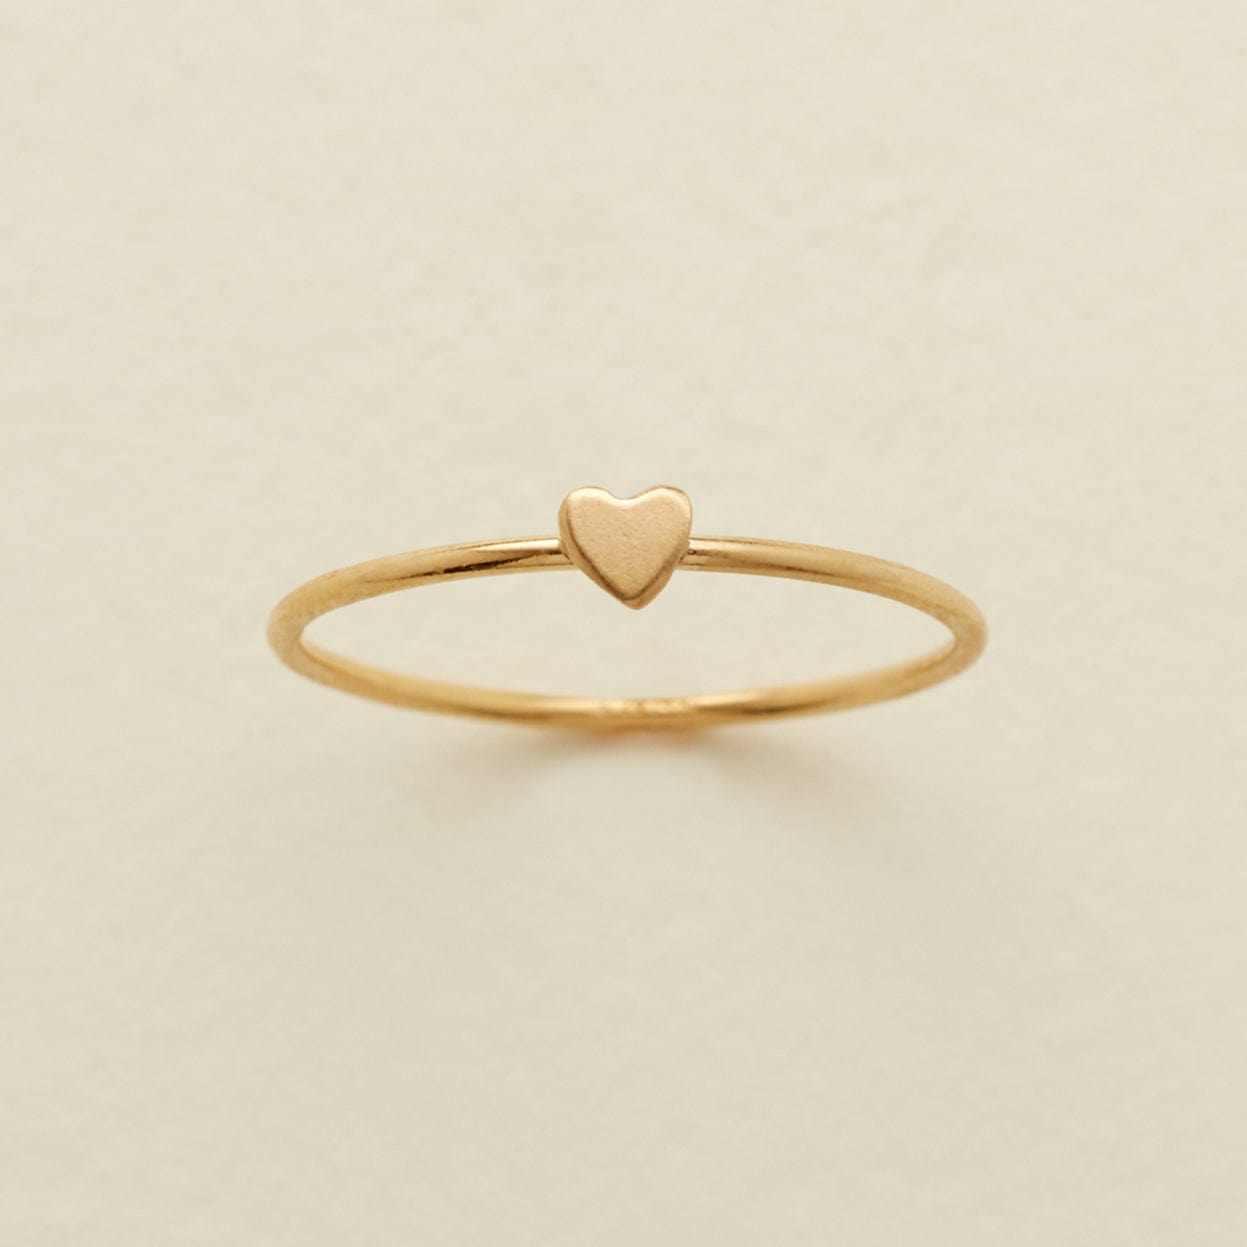 Heart Stacking Ring Gold Filled / 5 Ring